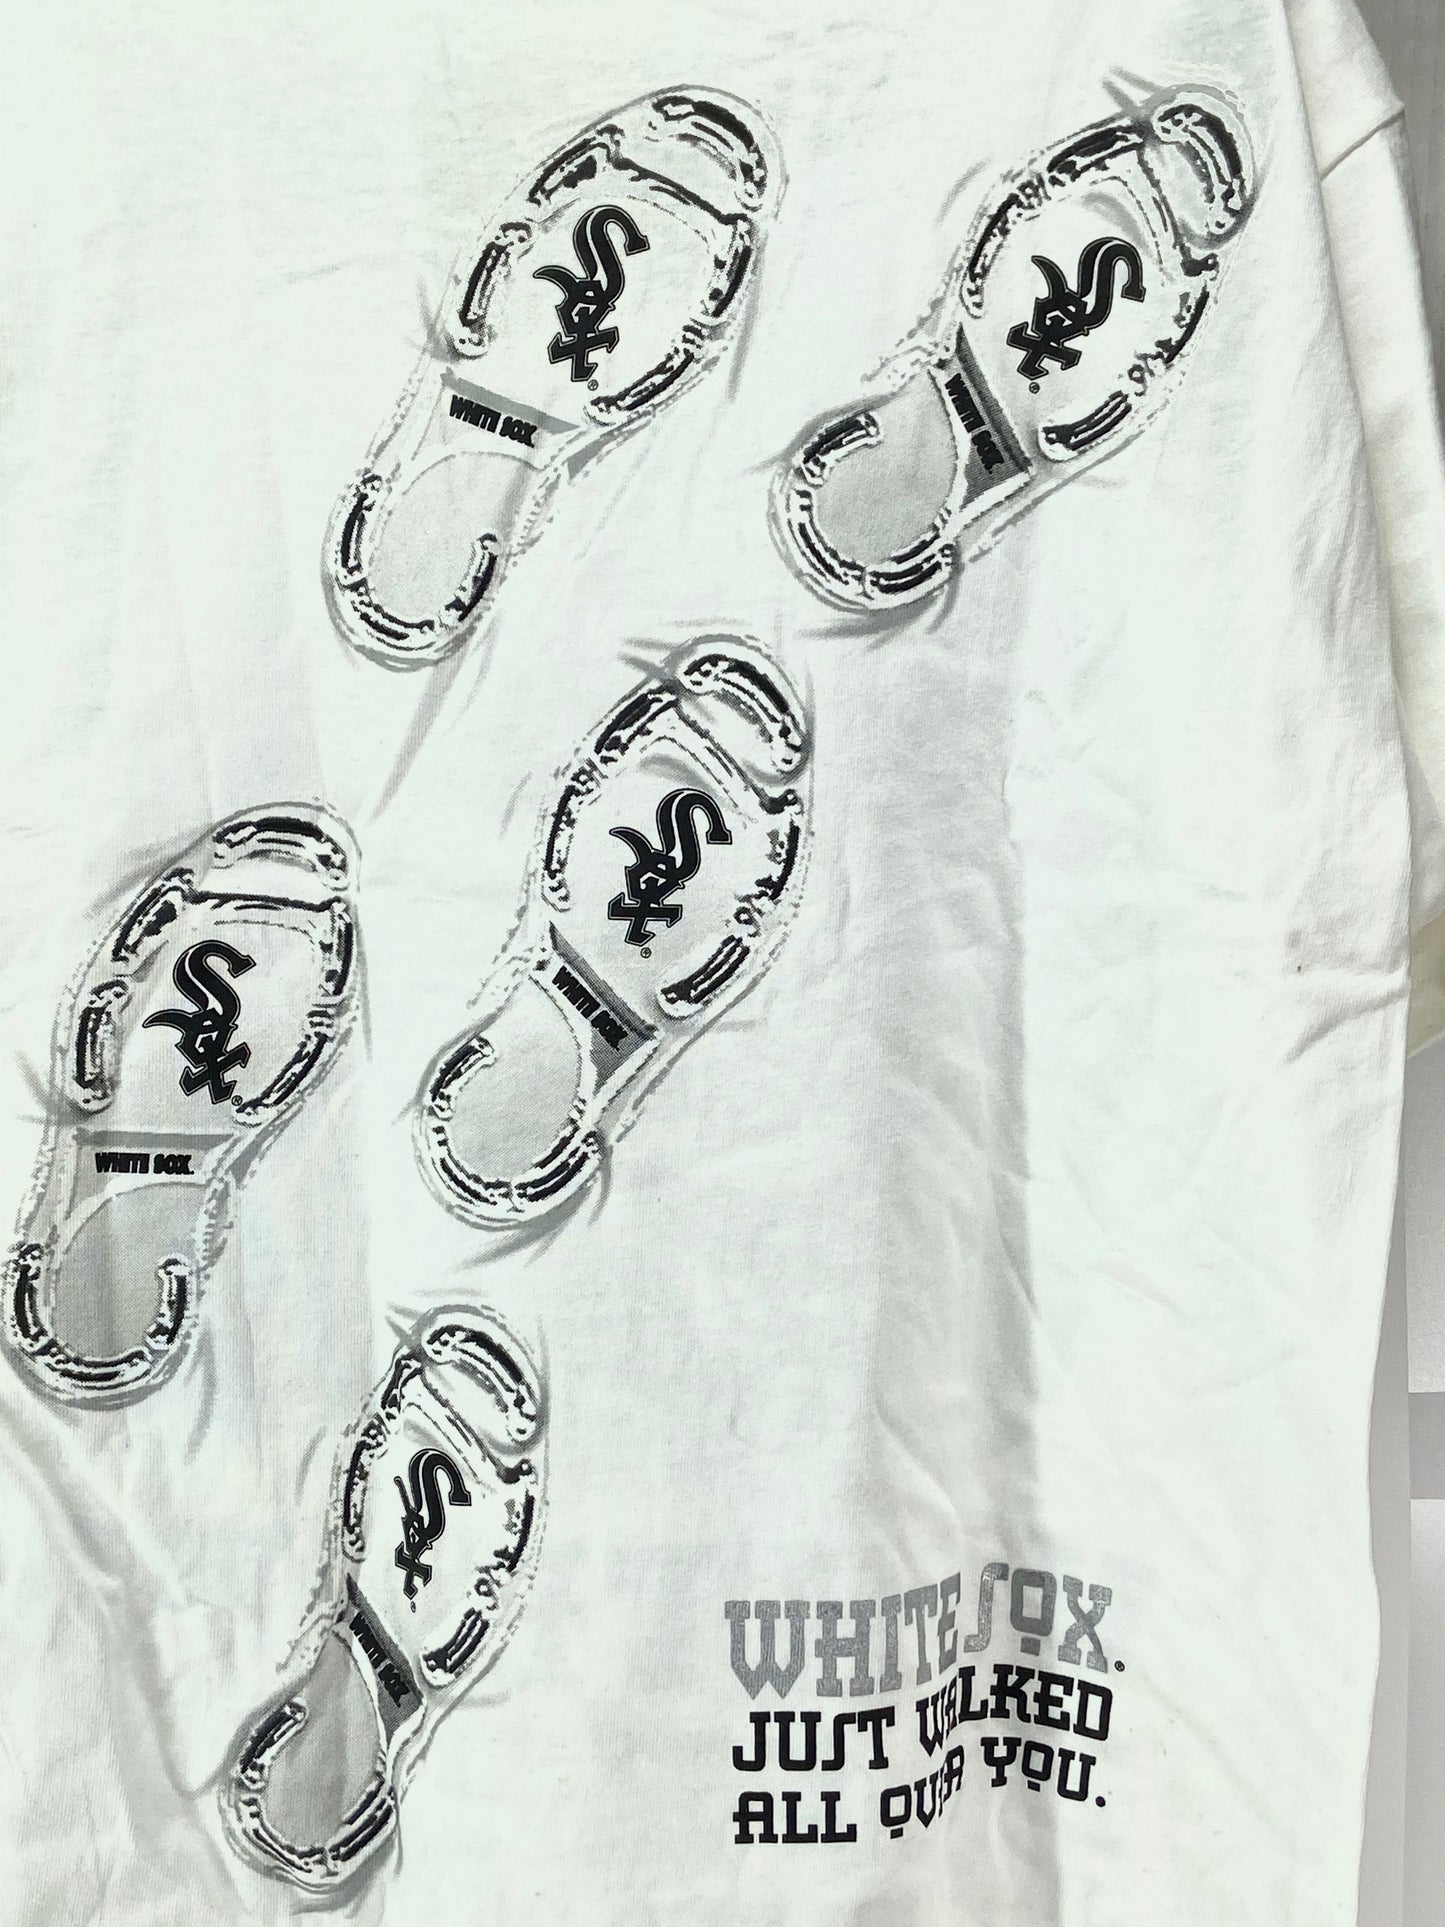 Chicago White Sox Vintage 1996 MLB "Just Walked All Over You" T-Shirt by College Concepts